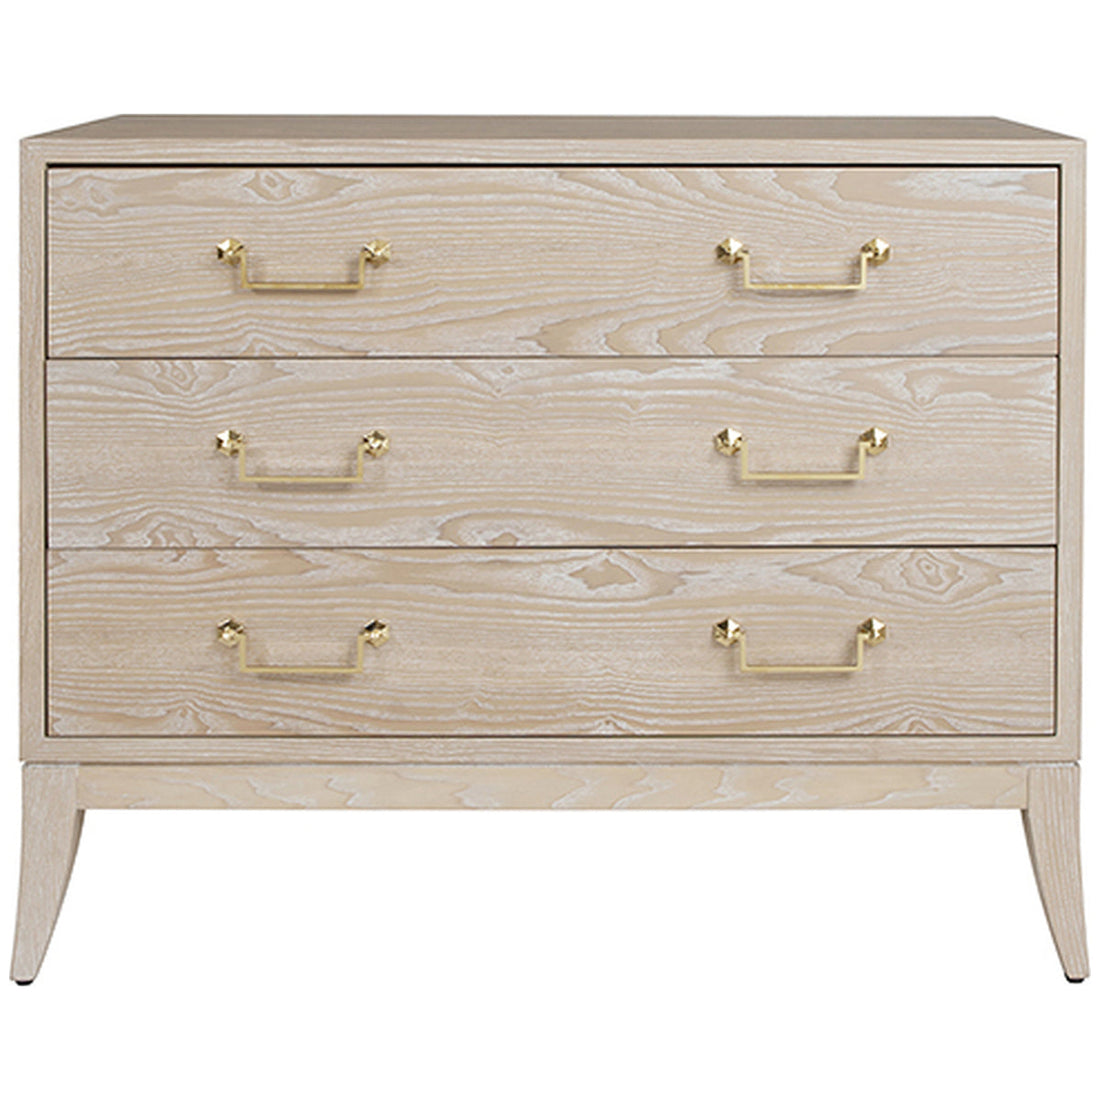 Worlds Away Sabre Leg 3-Drawer Chest with Brass Swing Handle